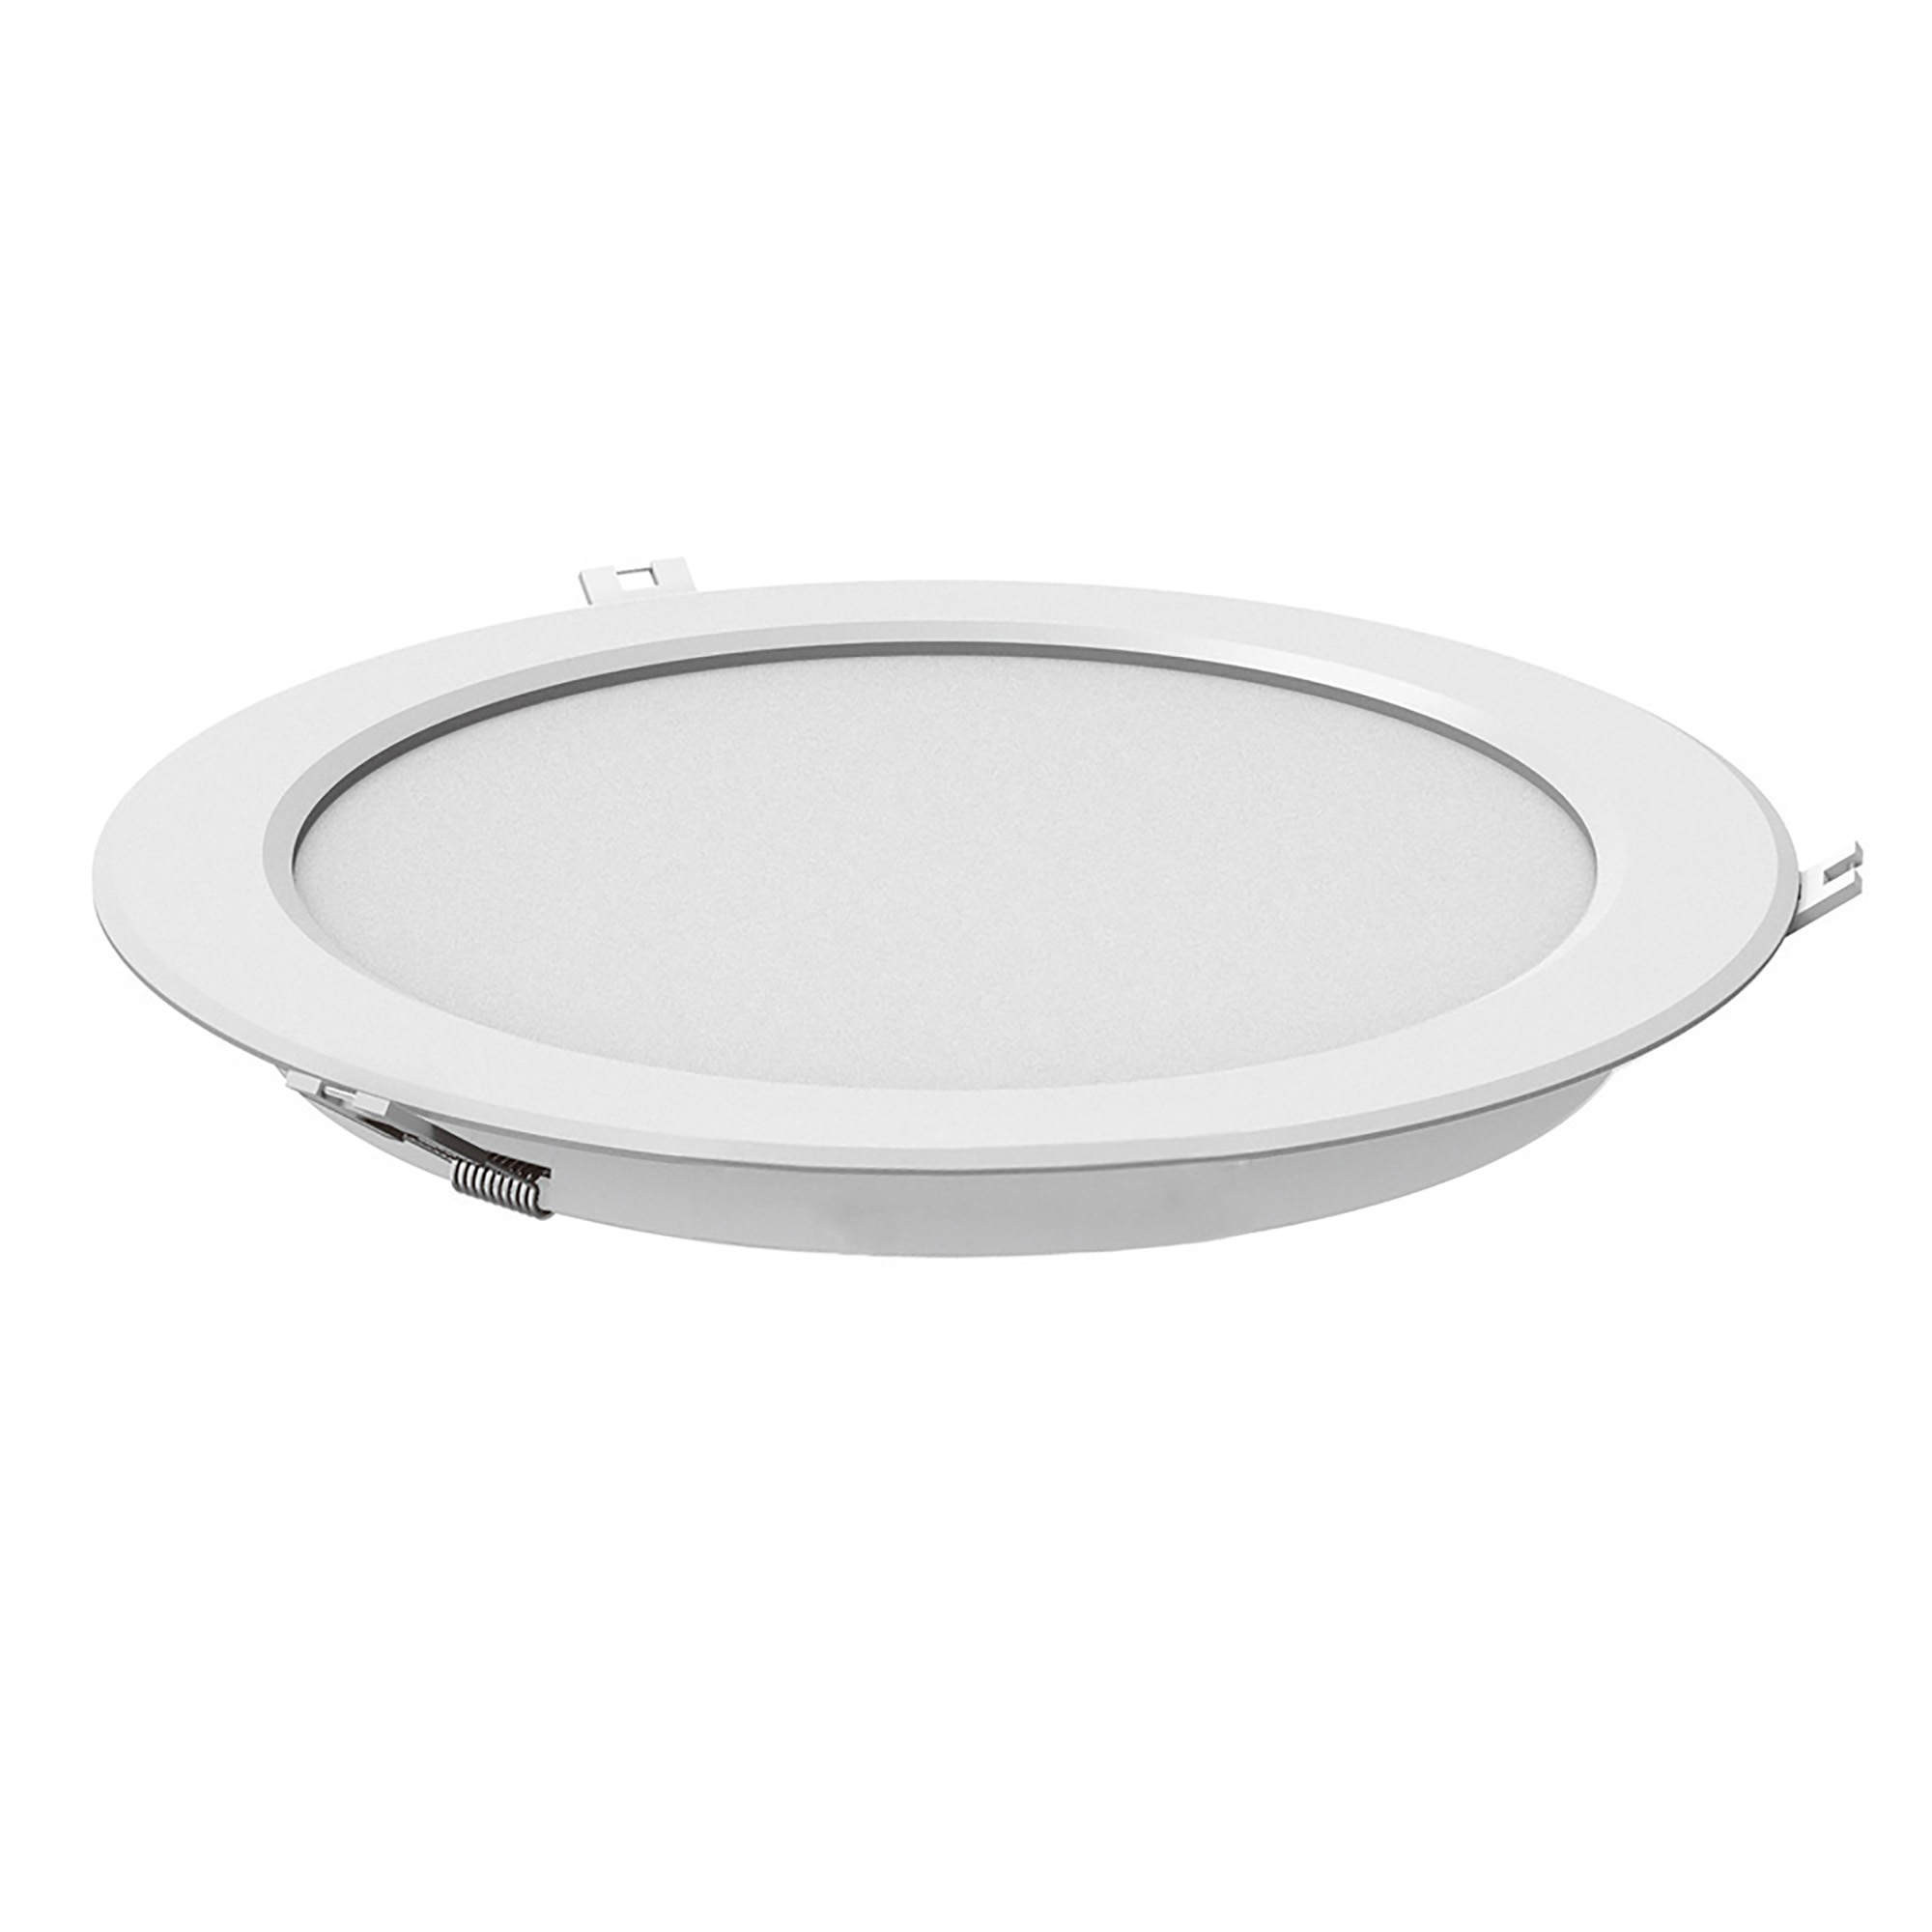 204153  Intego Round Classic 8 Inch 16W 6400K IP42 Cut-Out 210mm